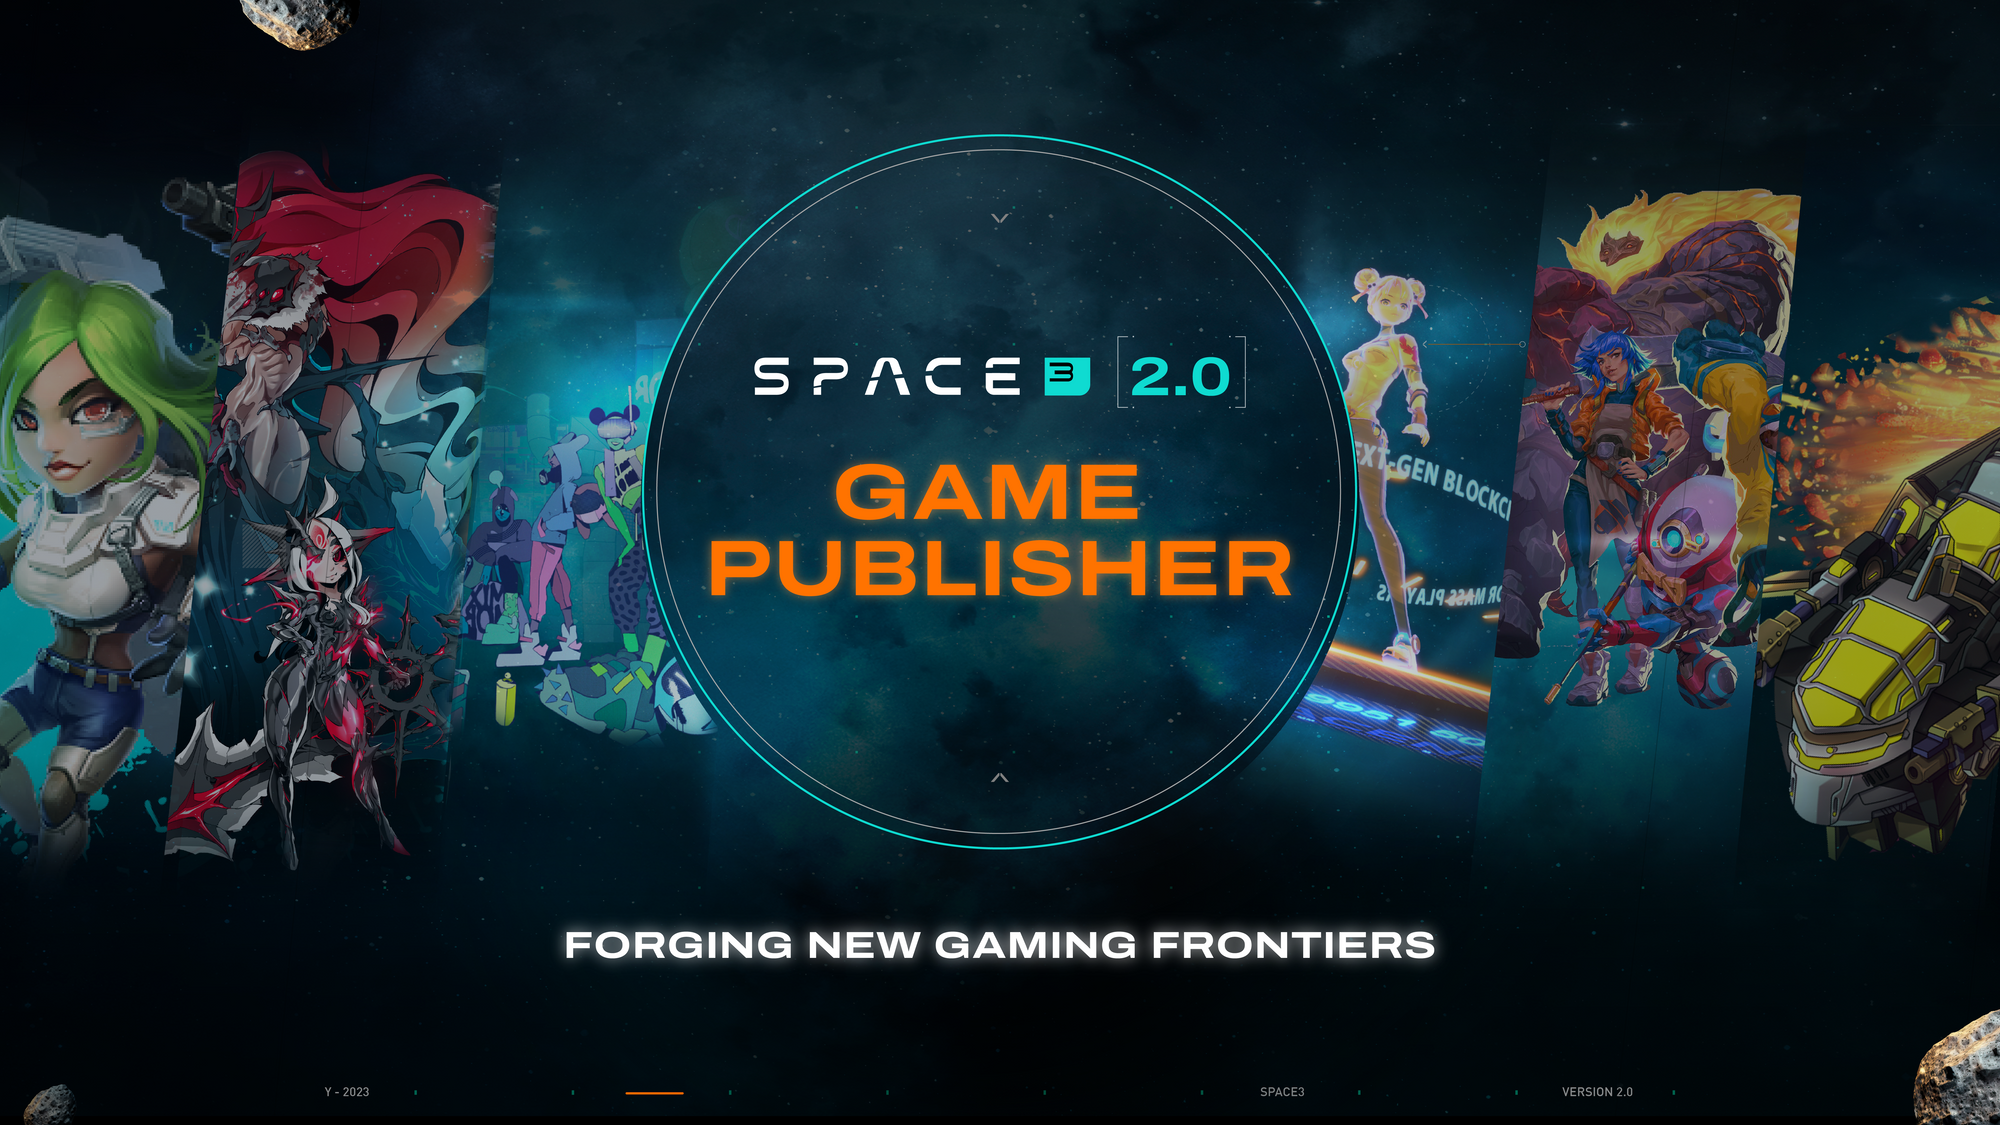 Space3 2.0: Forging New Frontiers as a Game Publisher